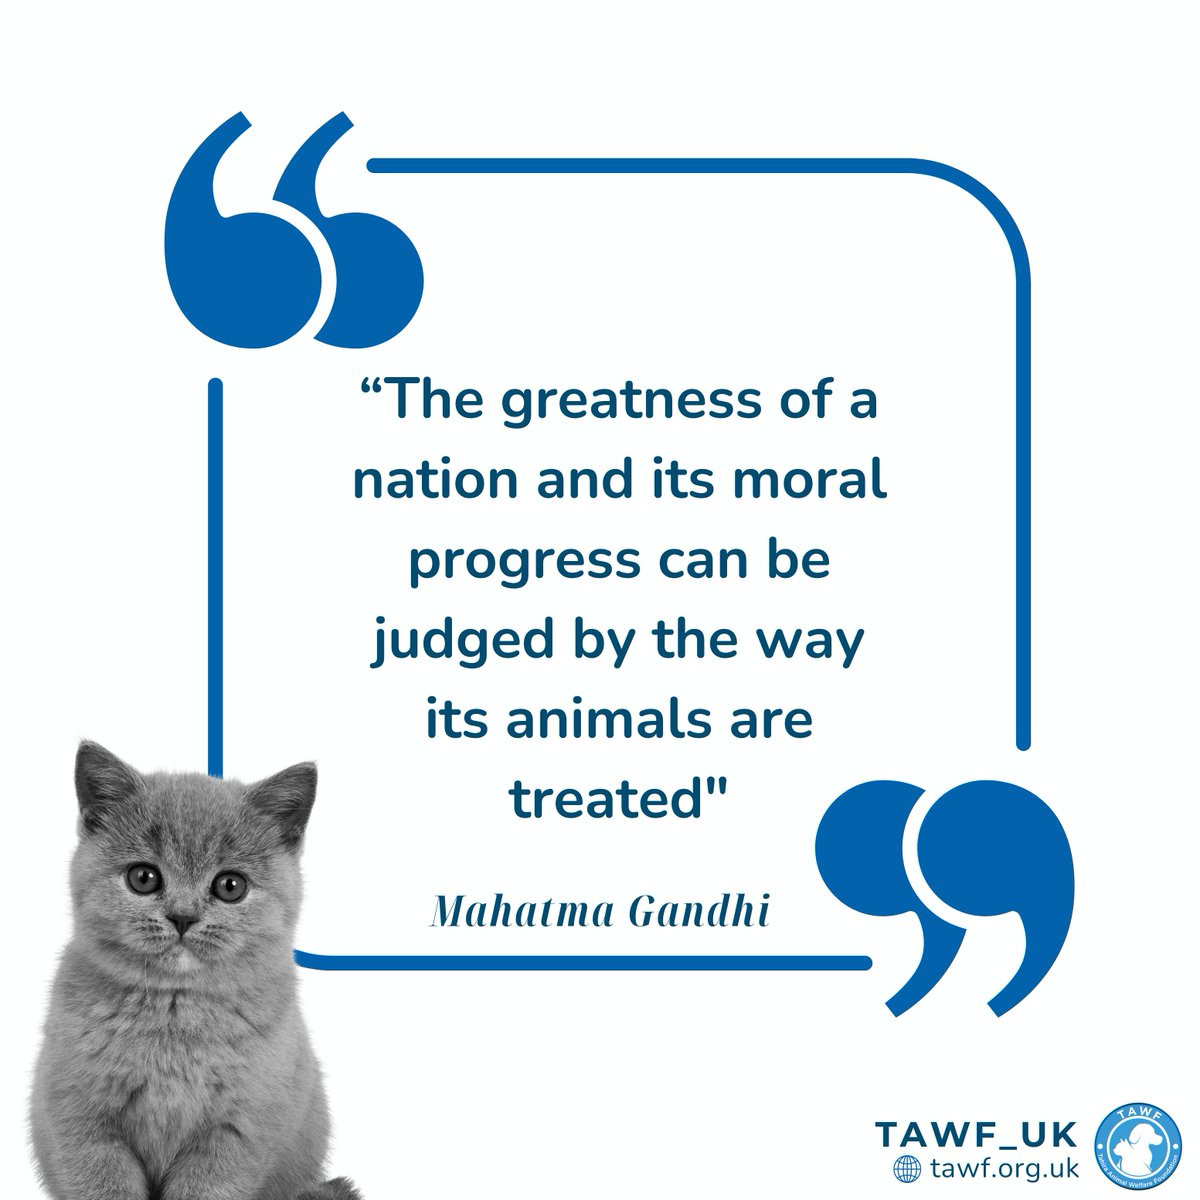 Animals feel pain and deserve respect. Their well-being reflects a nation's moral compass. Let's show compassion through action! 
Support animal welfare efforts today. 🐈🐕❤️
.
.
.
#animalrescue #animalwelfare #Libertarians #Mufc